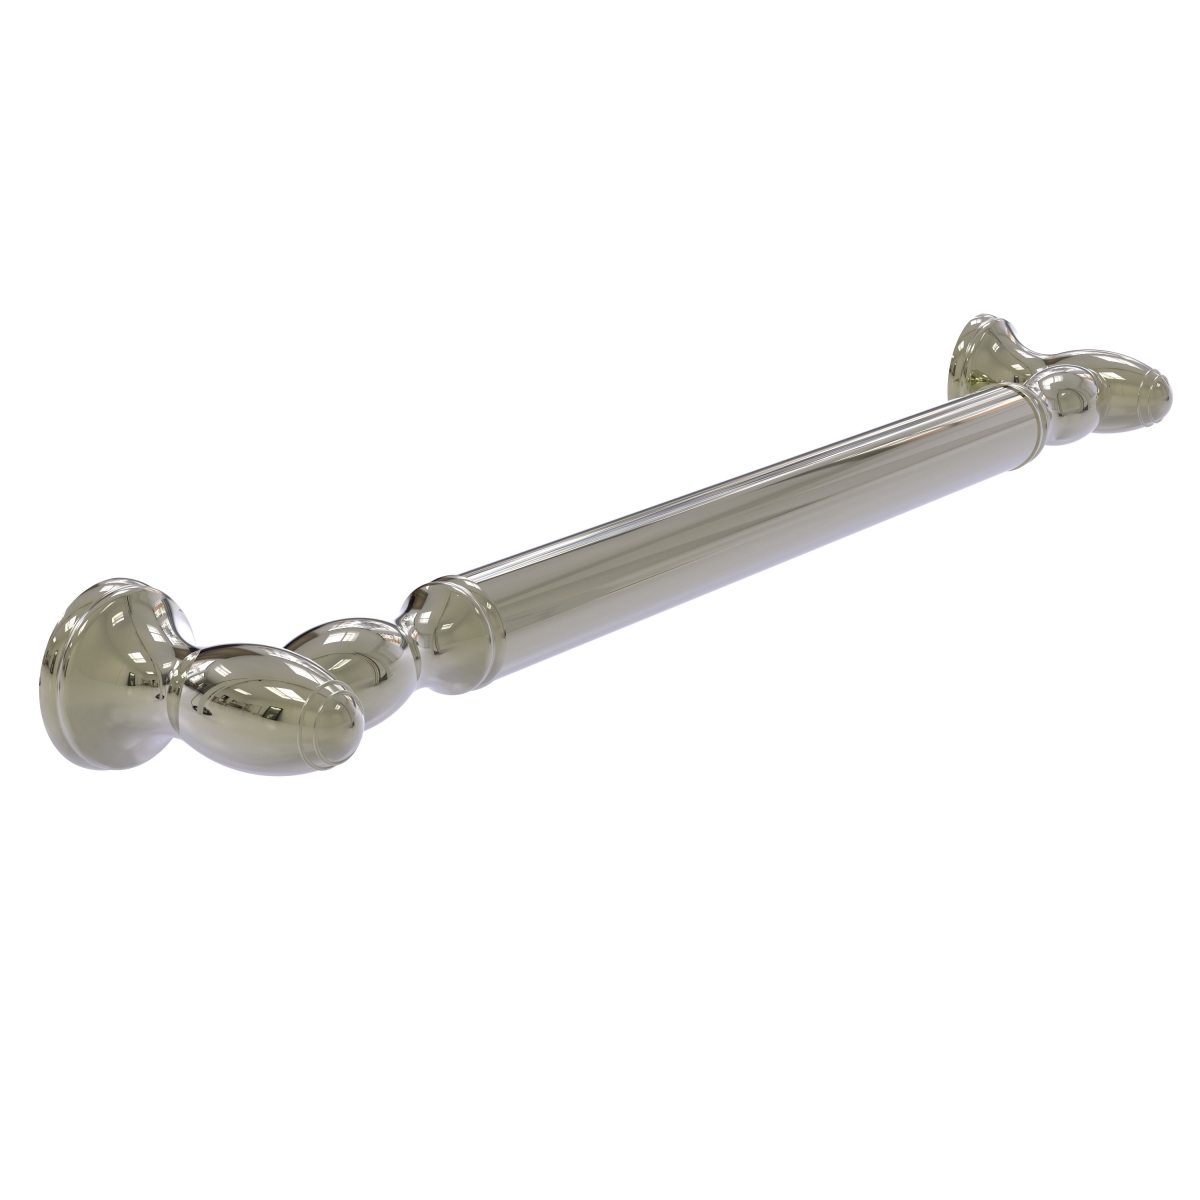 Picture of Allied Brass TD-GRS-24-PNI 24 in. Grab Bar Smooth, Polished Nickel - 3.5 x 26 x 24 in.